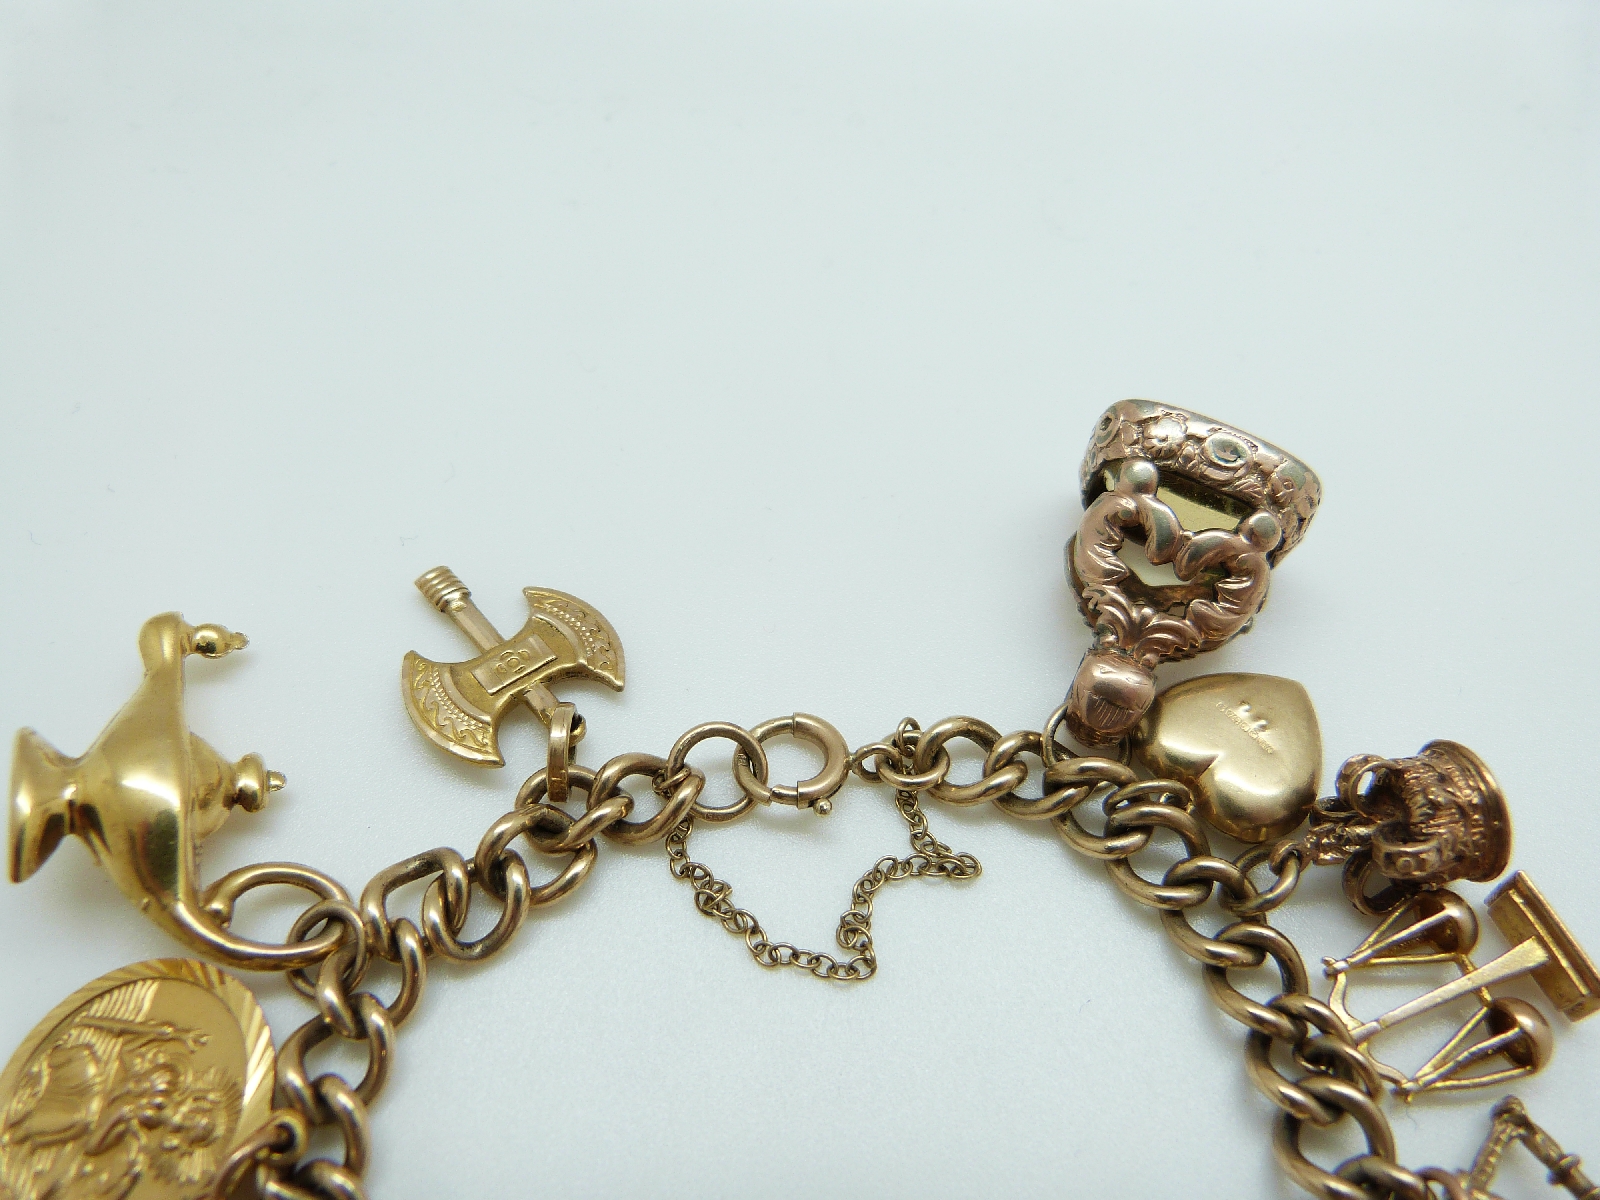 A 9ct gold charm bracelet with eleven 9ct gold charms including a crown, St Christopher, purse, - Image 4 of 8